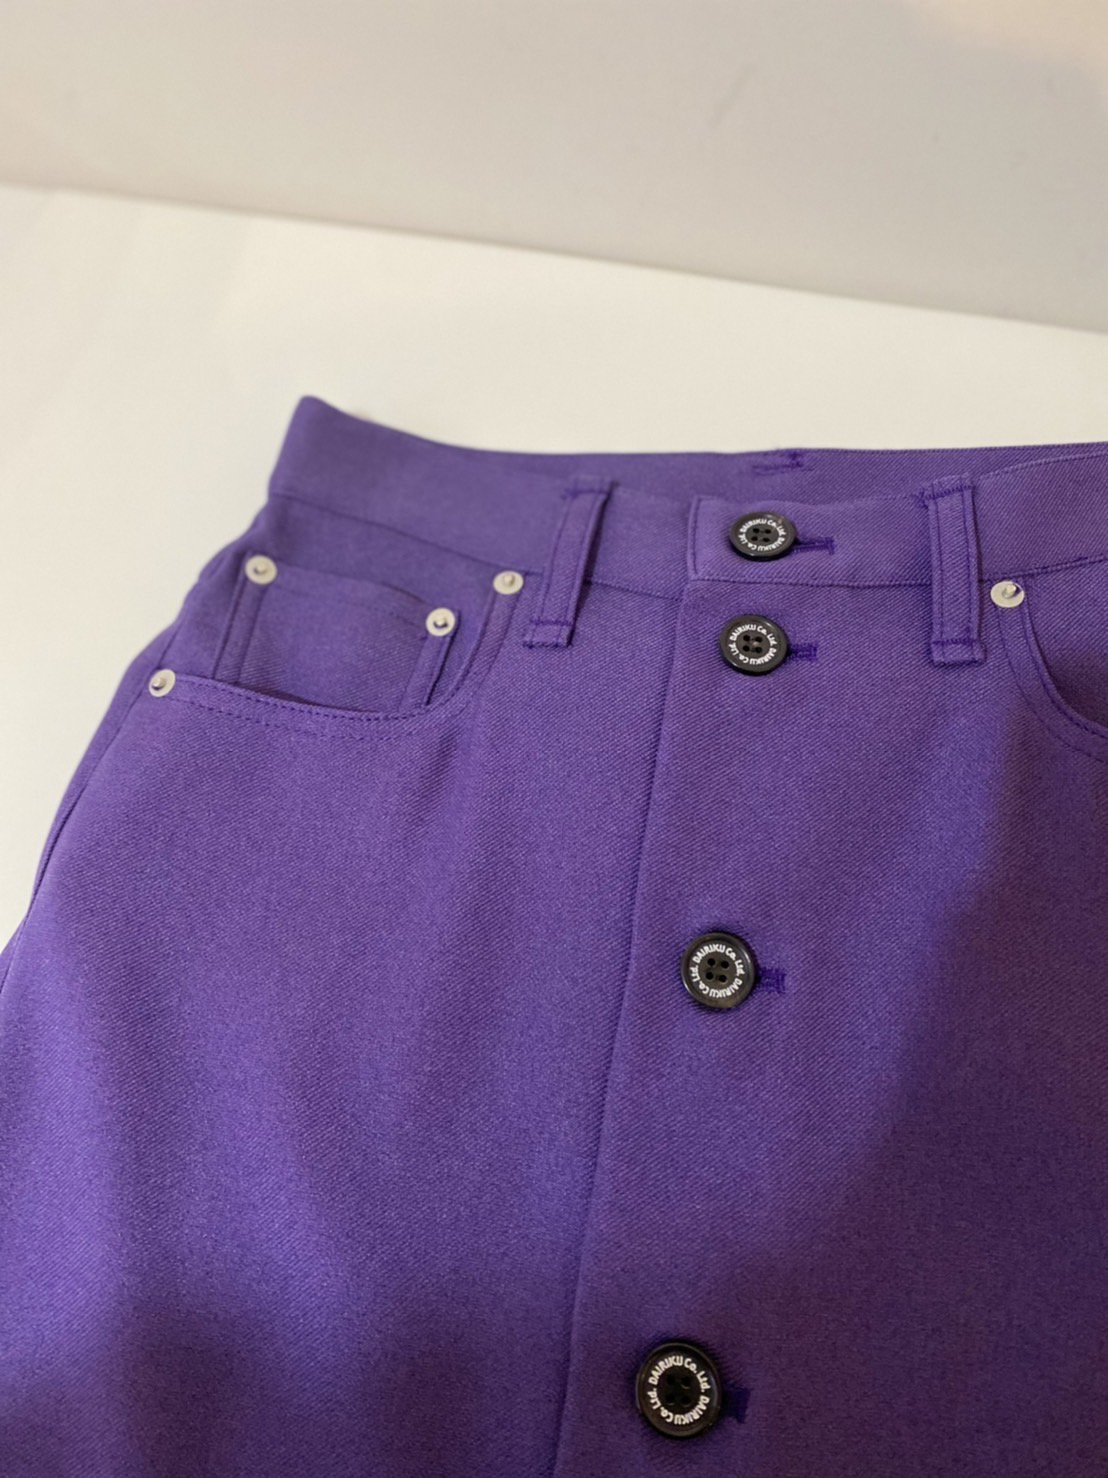 DAIRIKU<br />Long Polyester Skirt / Purple<img class='new_mark_img2' src='https://img.shop-pro.jp/img/new/icons14.gif' style='border:none;display:inline;margin:0px;padding:0px;width:auto;' />